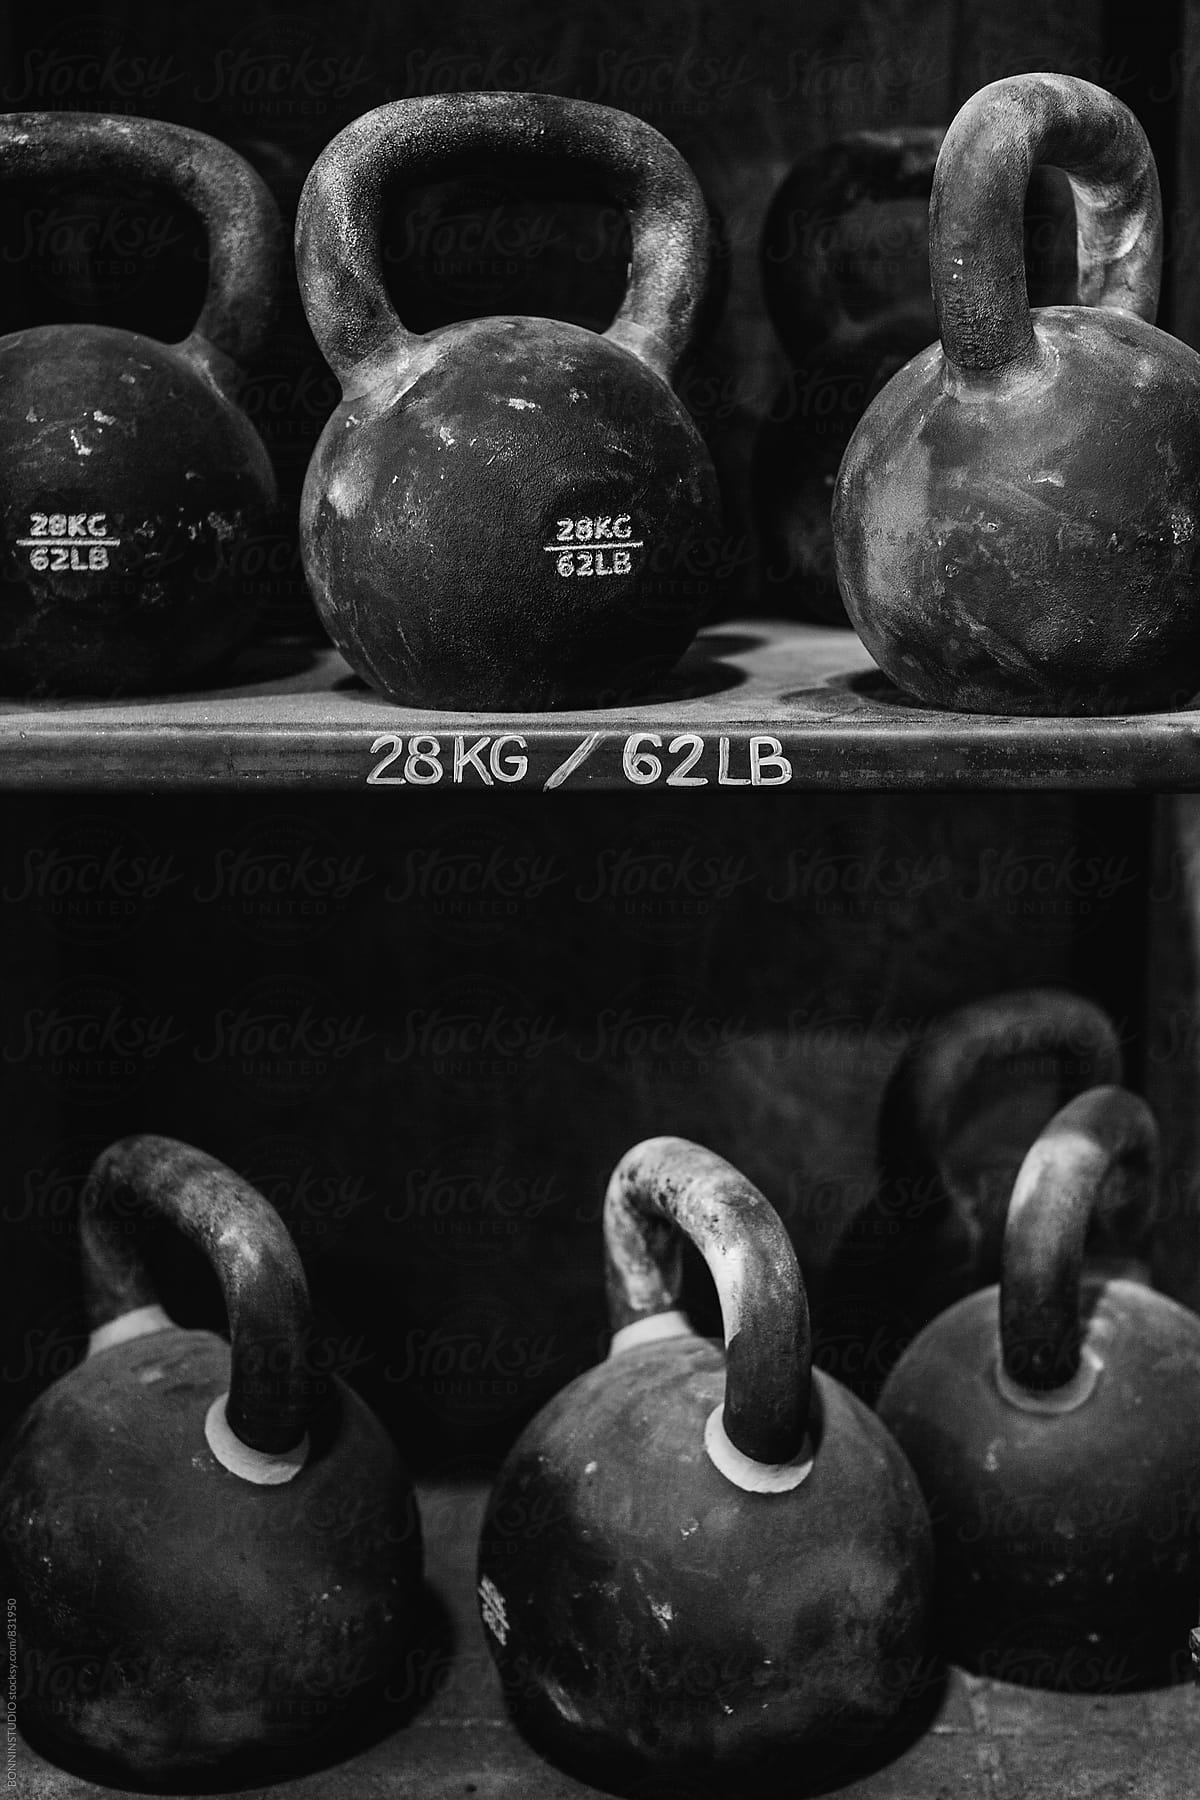 Kettlebells in a gym. Black and white photo.